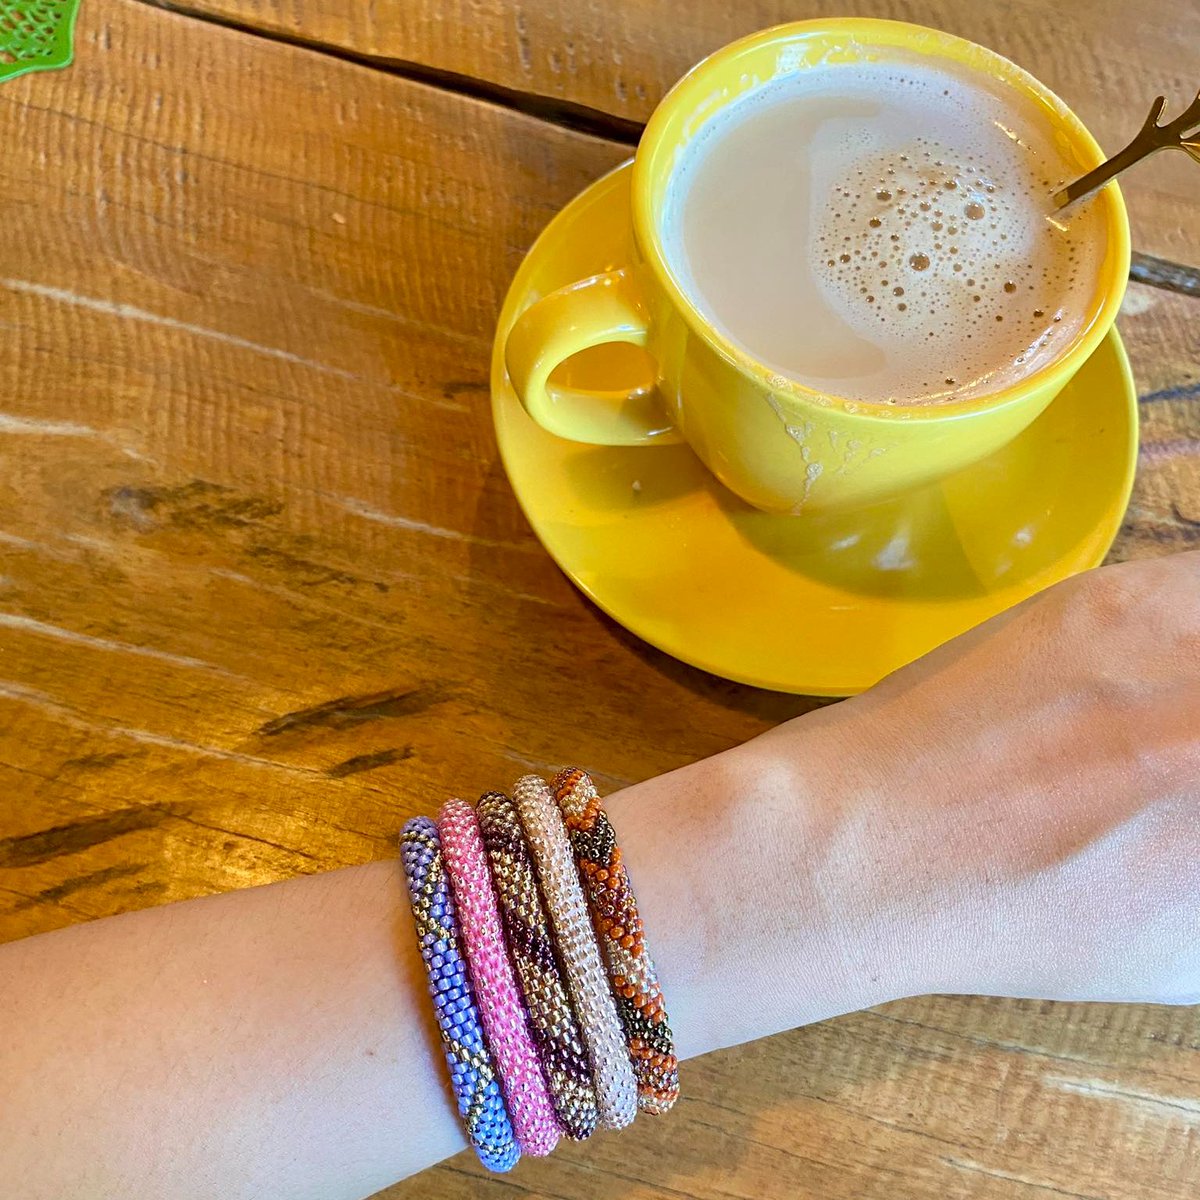 Monday - a chance to reset, refocus, and conquer.☕

sashkaco.com/collections/all

#Sashkaco  #forher #springstyle #trends #fashion #womenjewelry #Mondayvibes #handmade #dailyaccessories  #stylefashion  #beadedjewelry #glassbeads #giftideas #alwayspositivevibes #shopnow #Florida